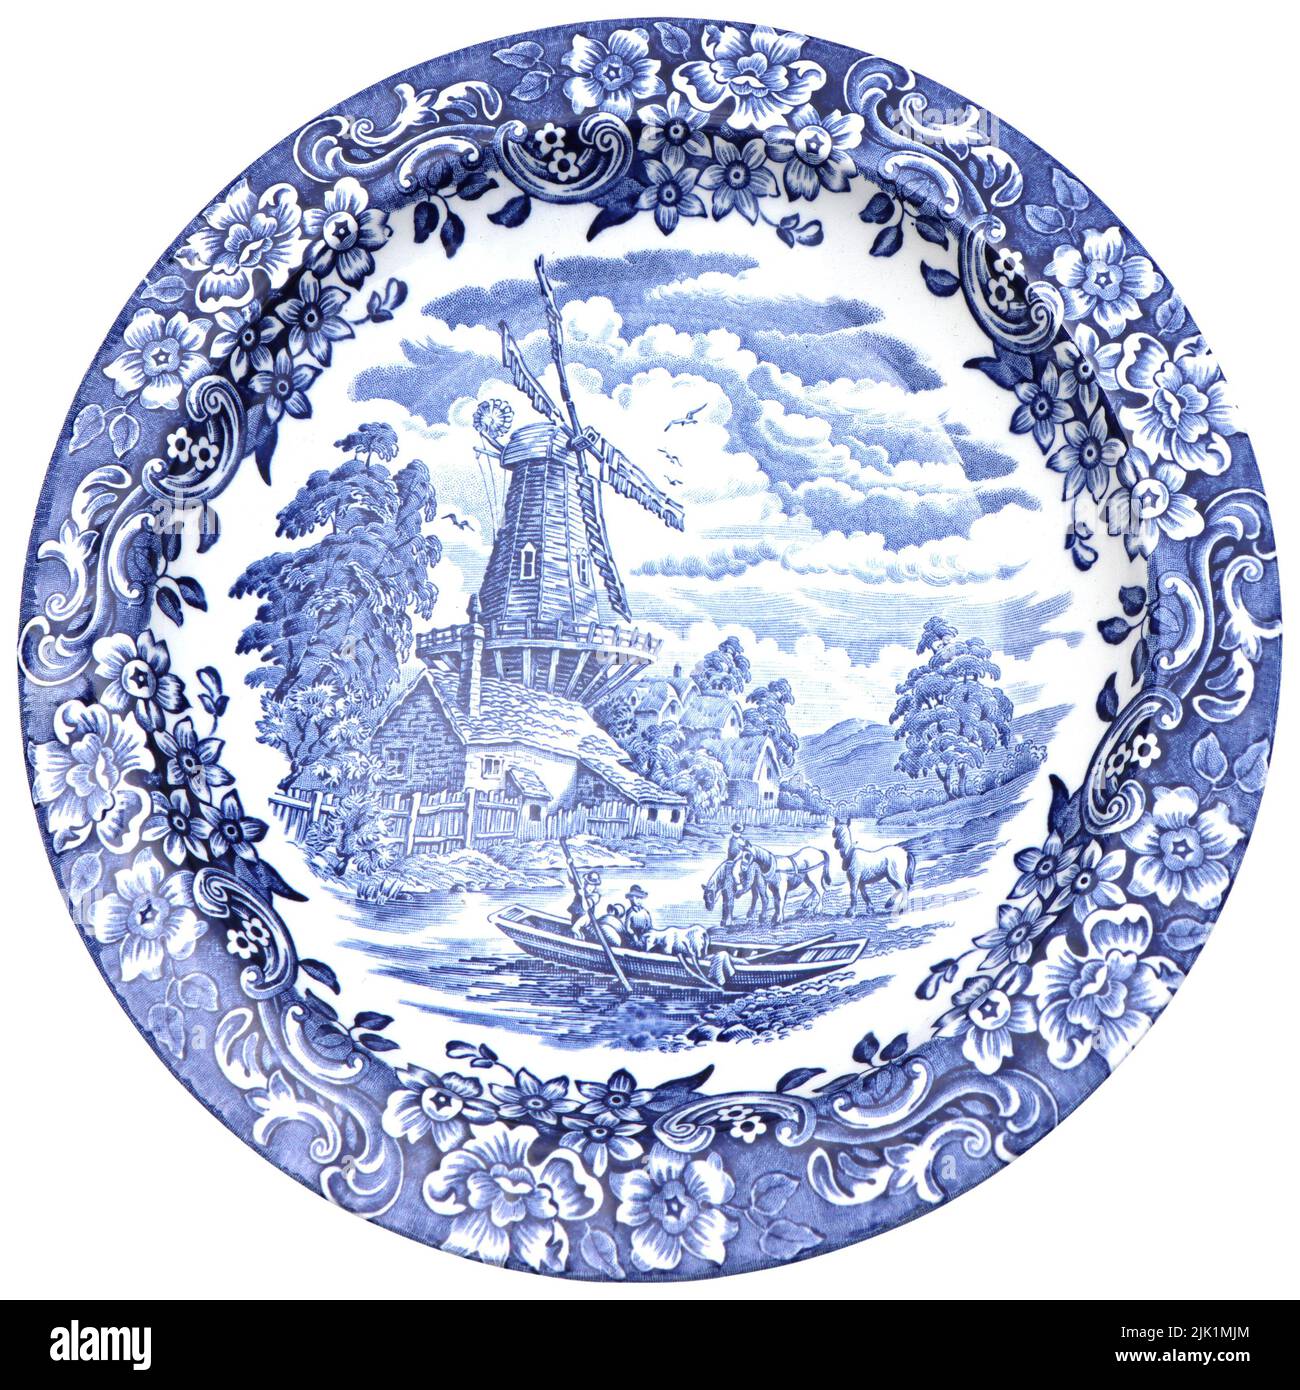 Old Blue and white ceramic plates with traditional Dutch landscape, canals, boats, windmills, isolated Stock Photo